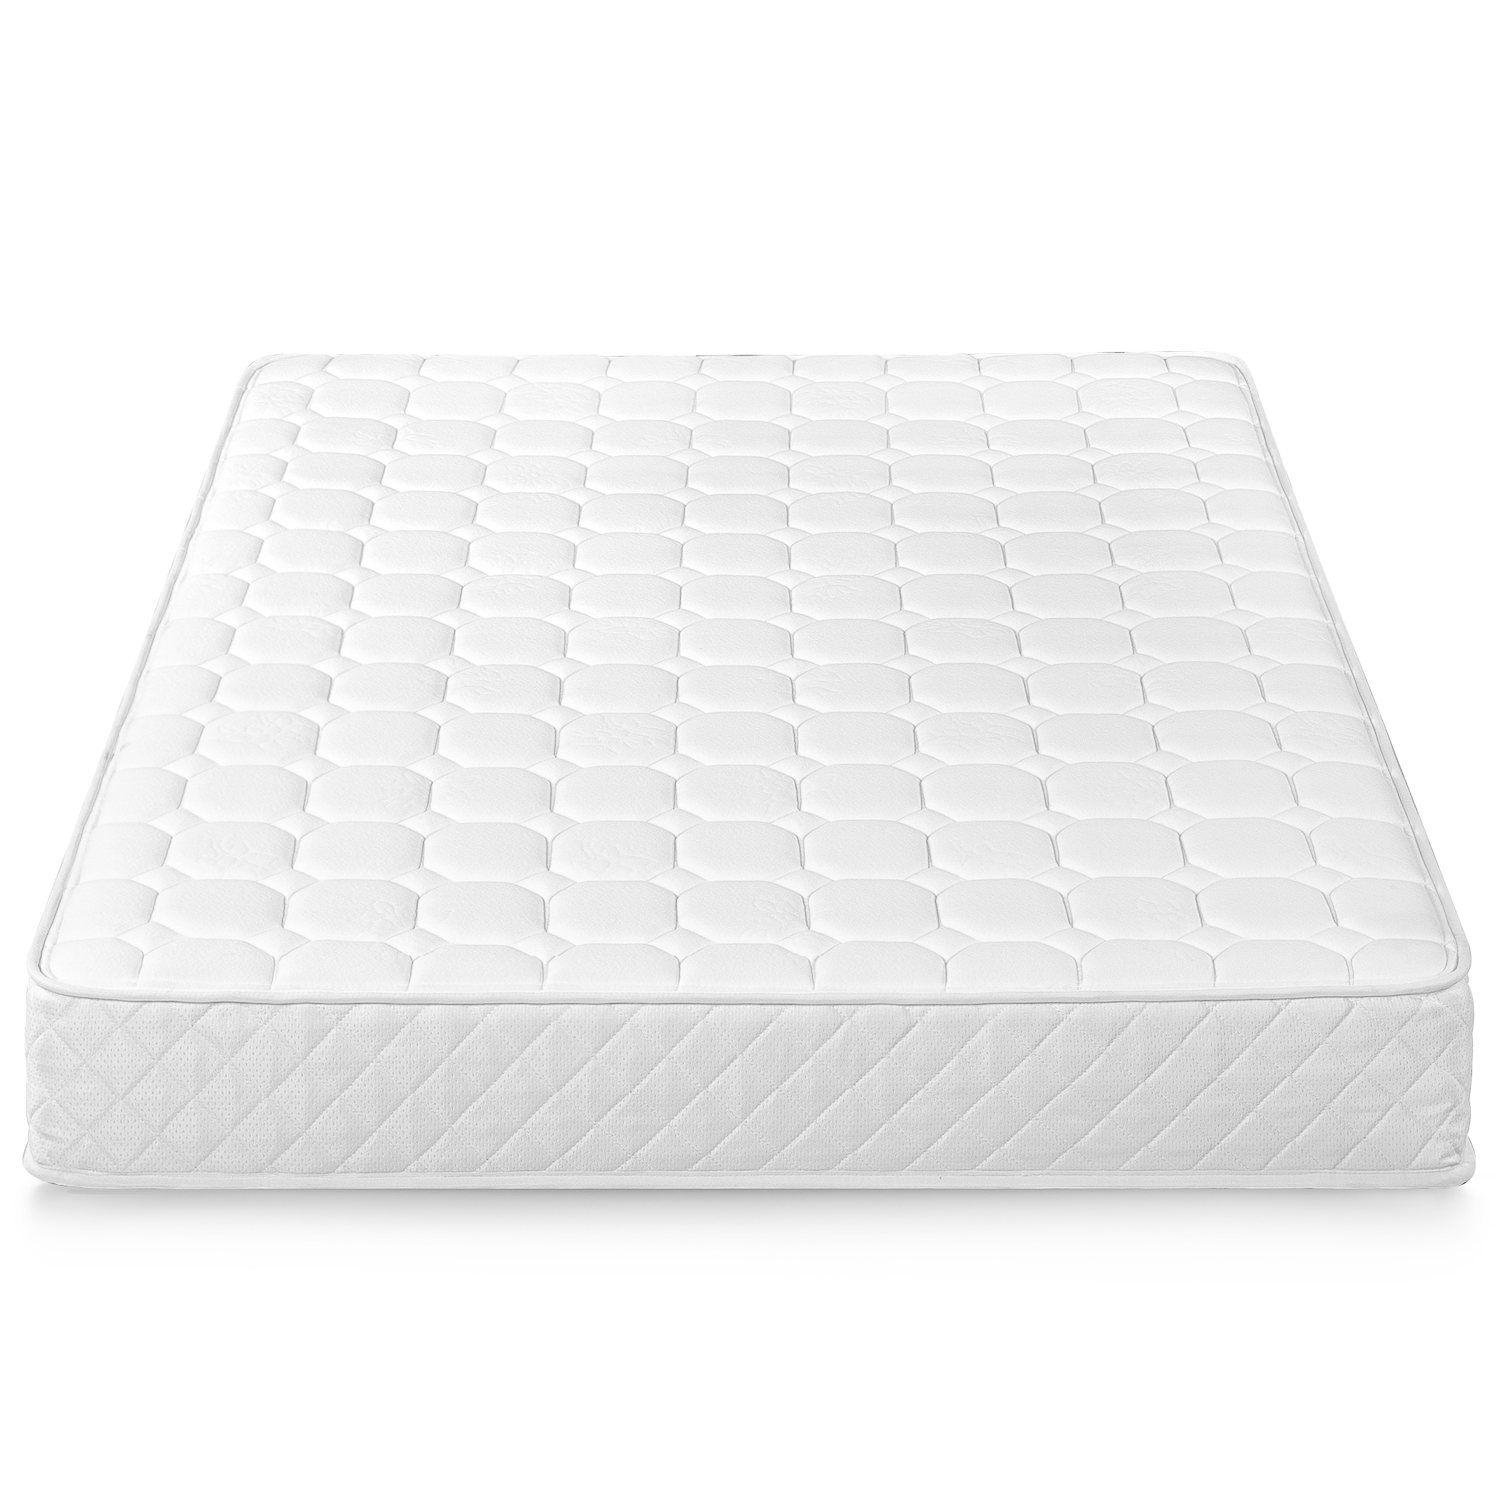 8" Quilted Hybrid of Comfort Foam and Pocket Spring Mattress, Twin - image 1 of 5